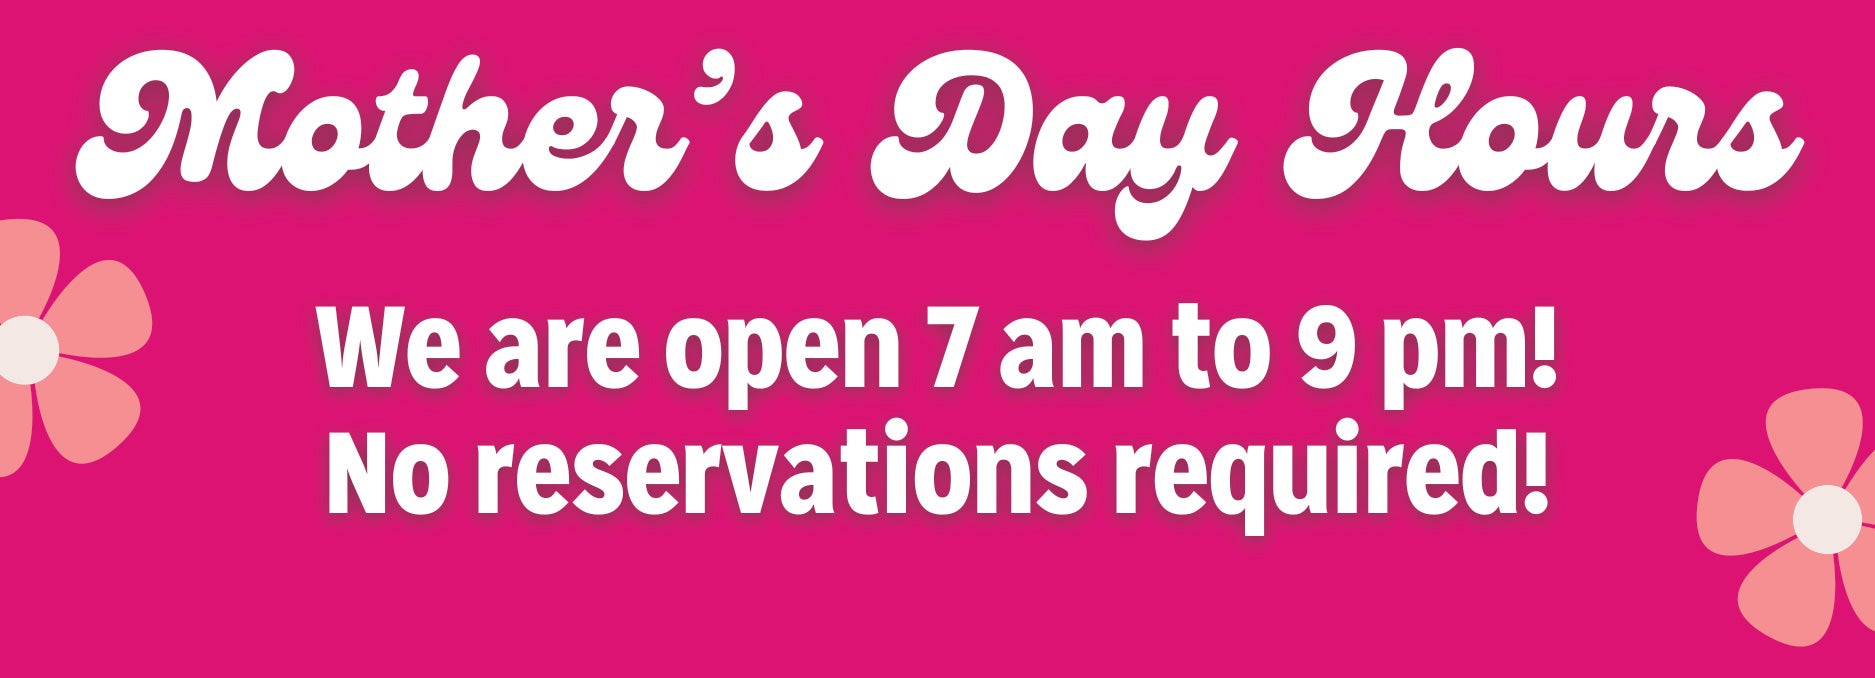 We are open 7 am to 9 pm, no reservations required!